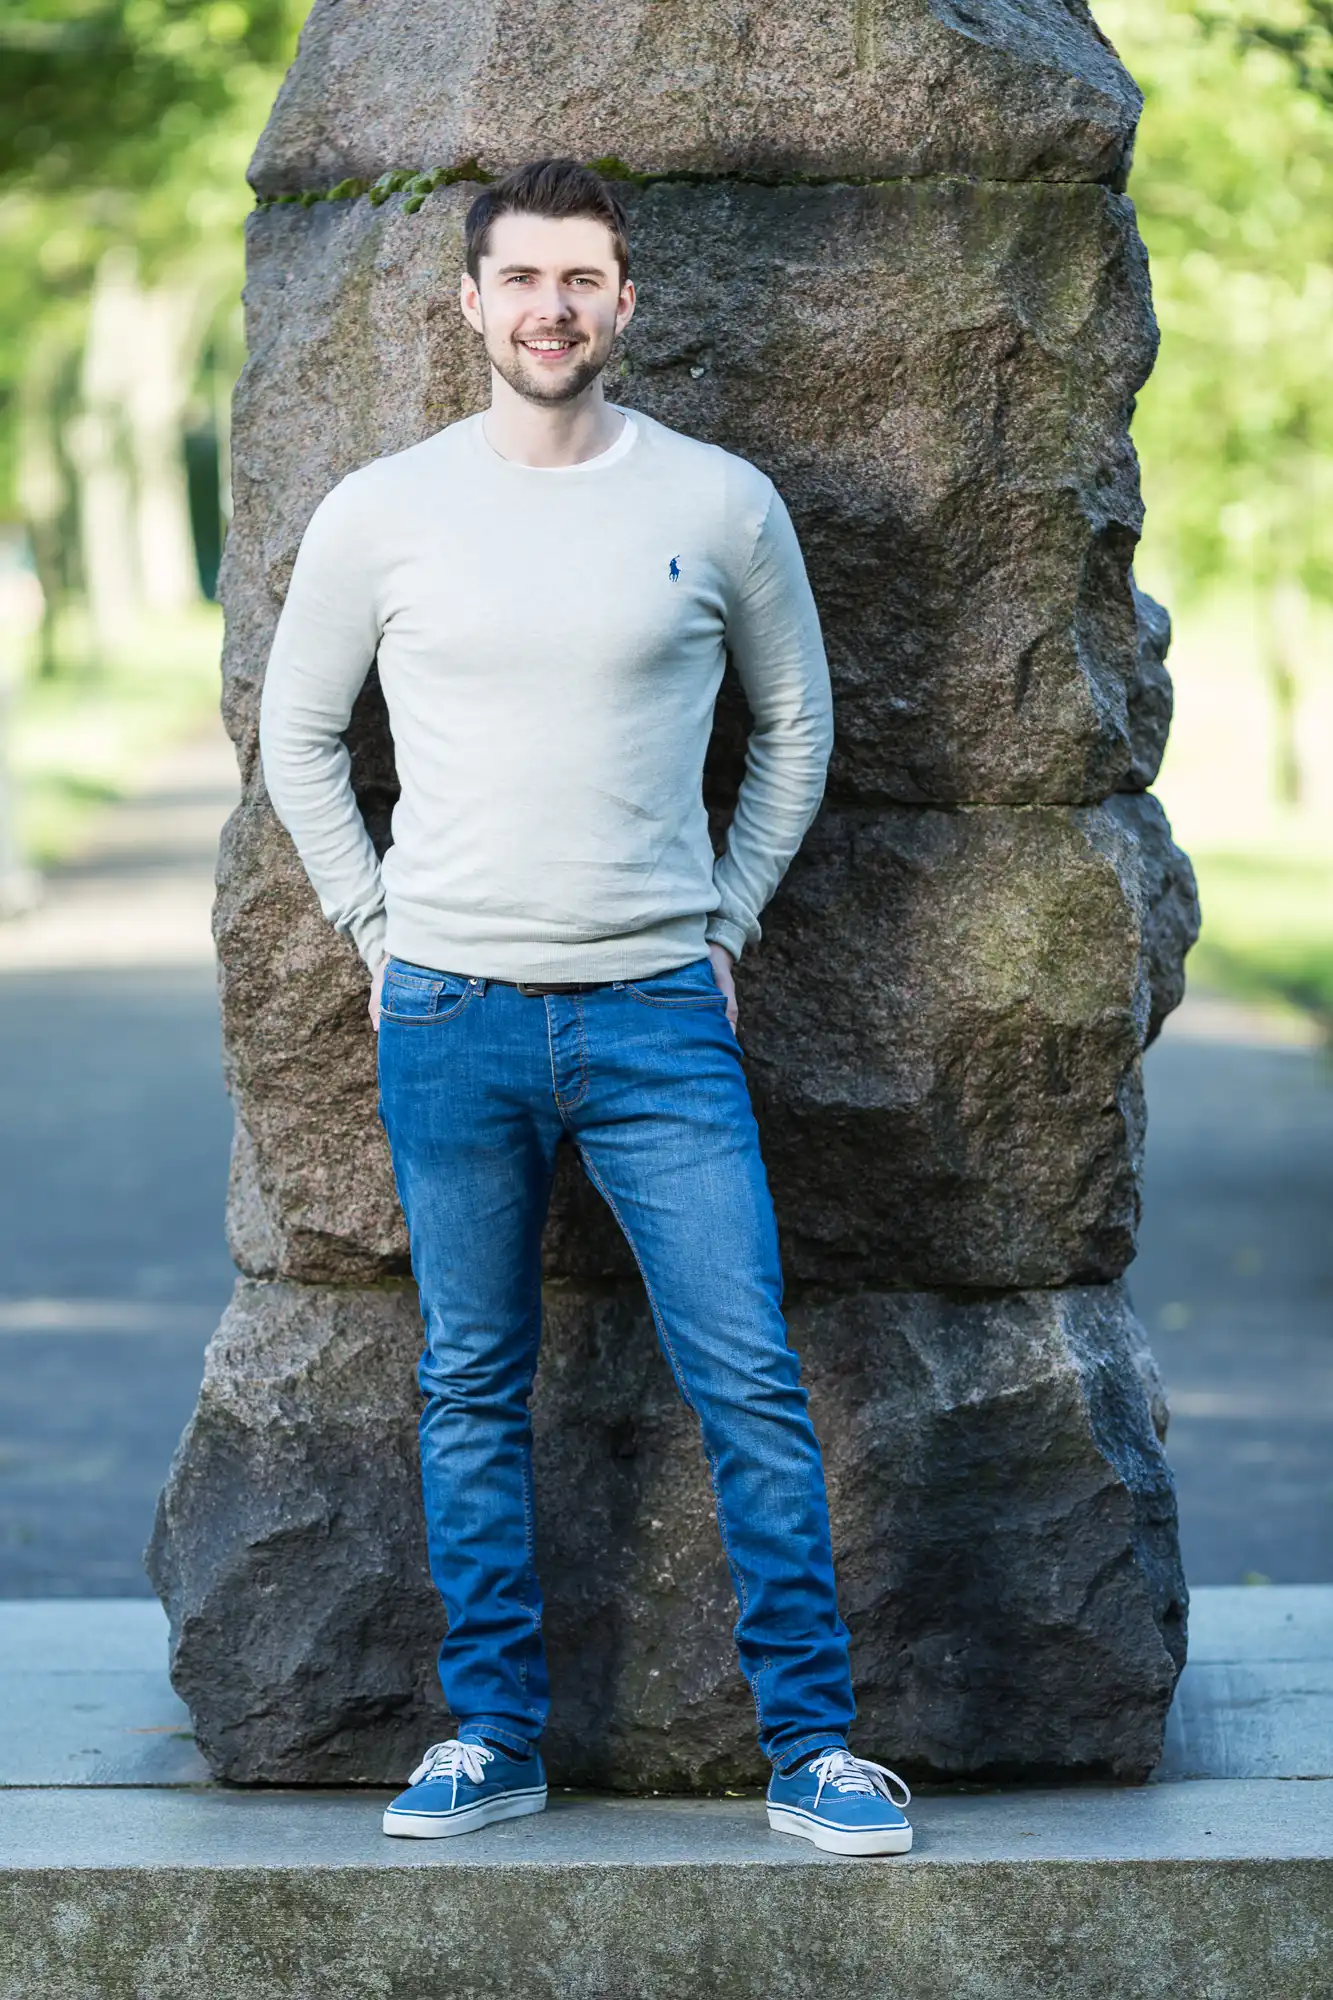 A man smiling for the camera, standing in front of a large boulder in a park, dressed in a white long-sleeve shirt, blue jeans, and blue sneakers.